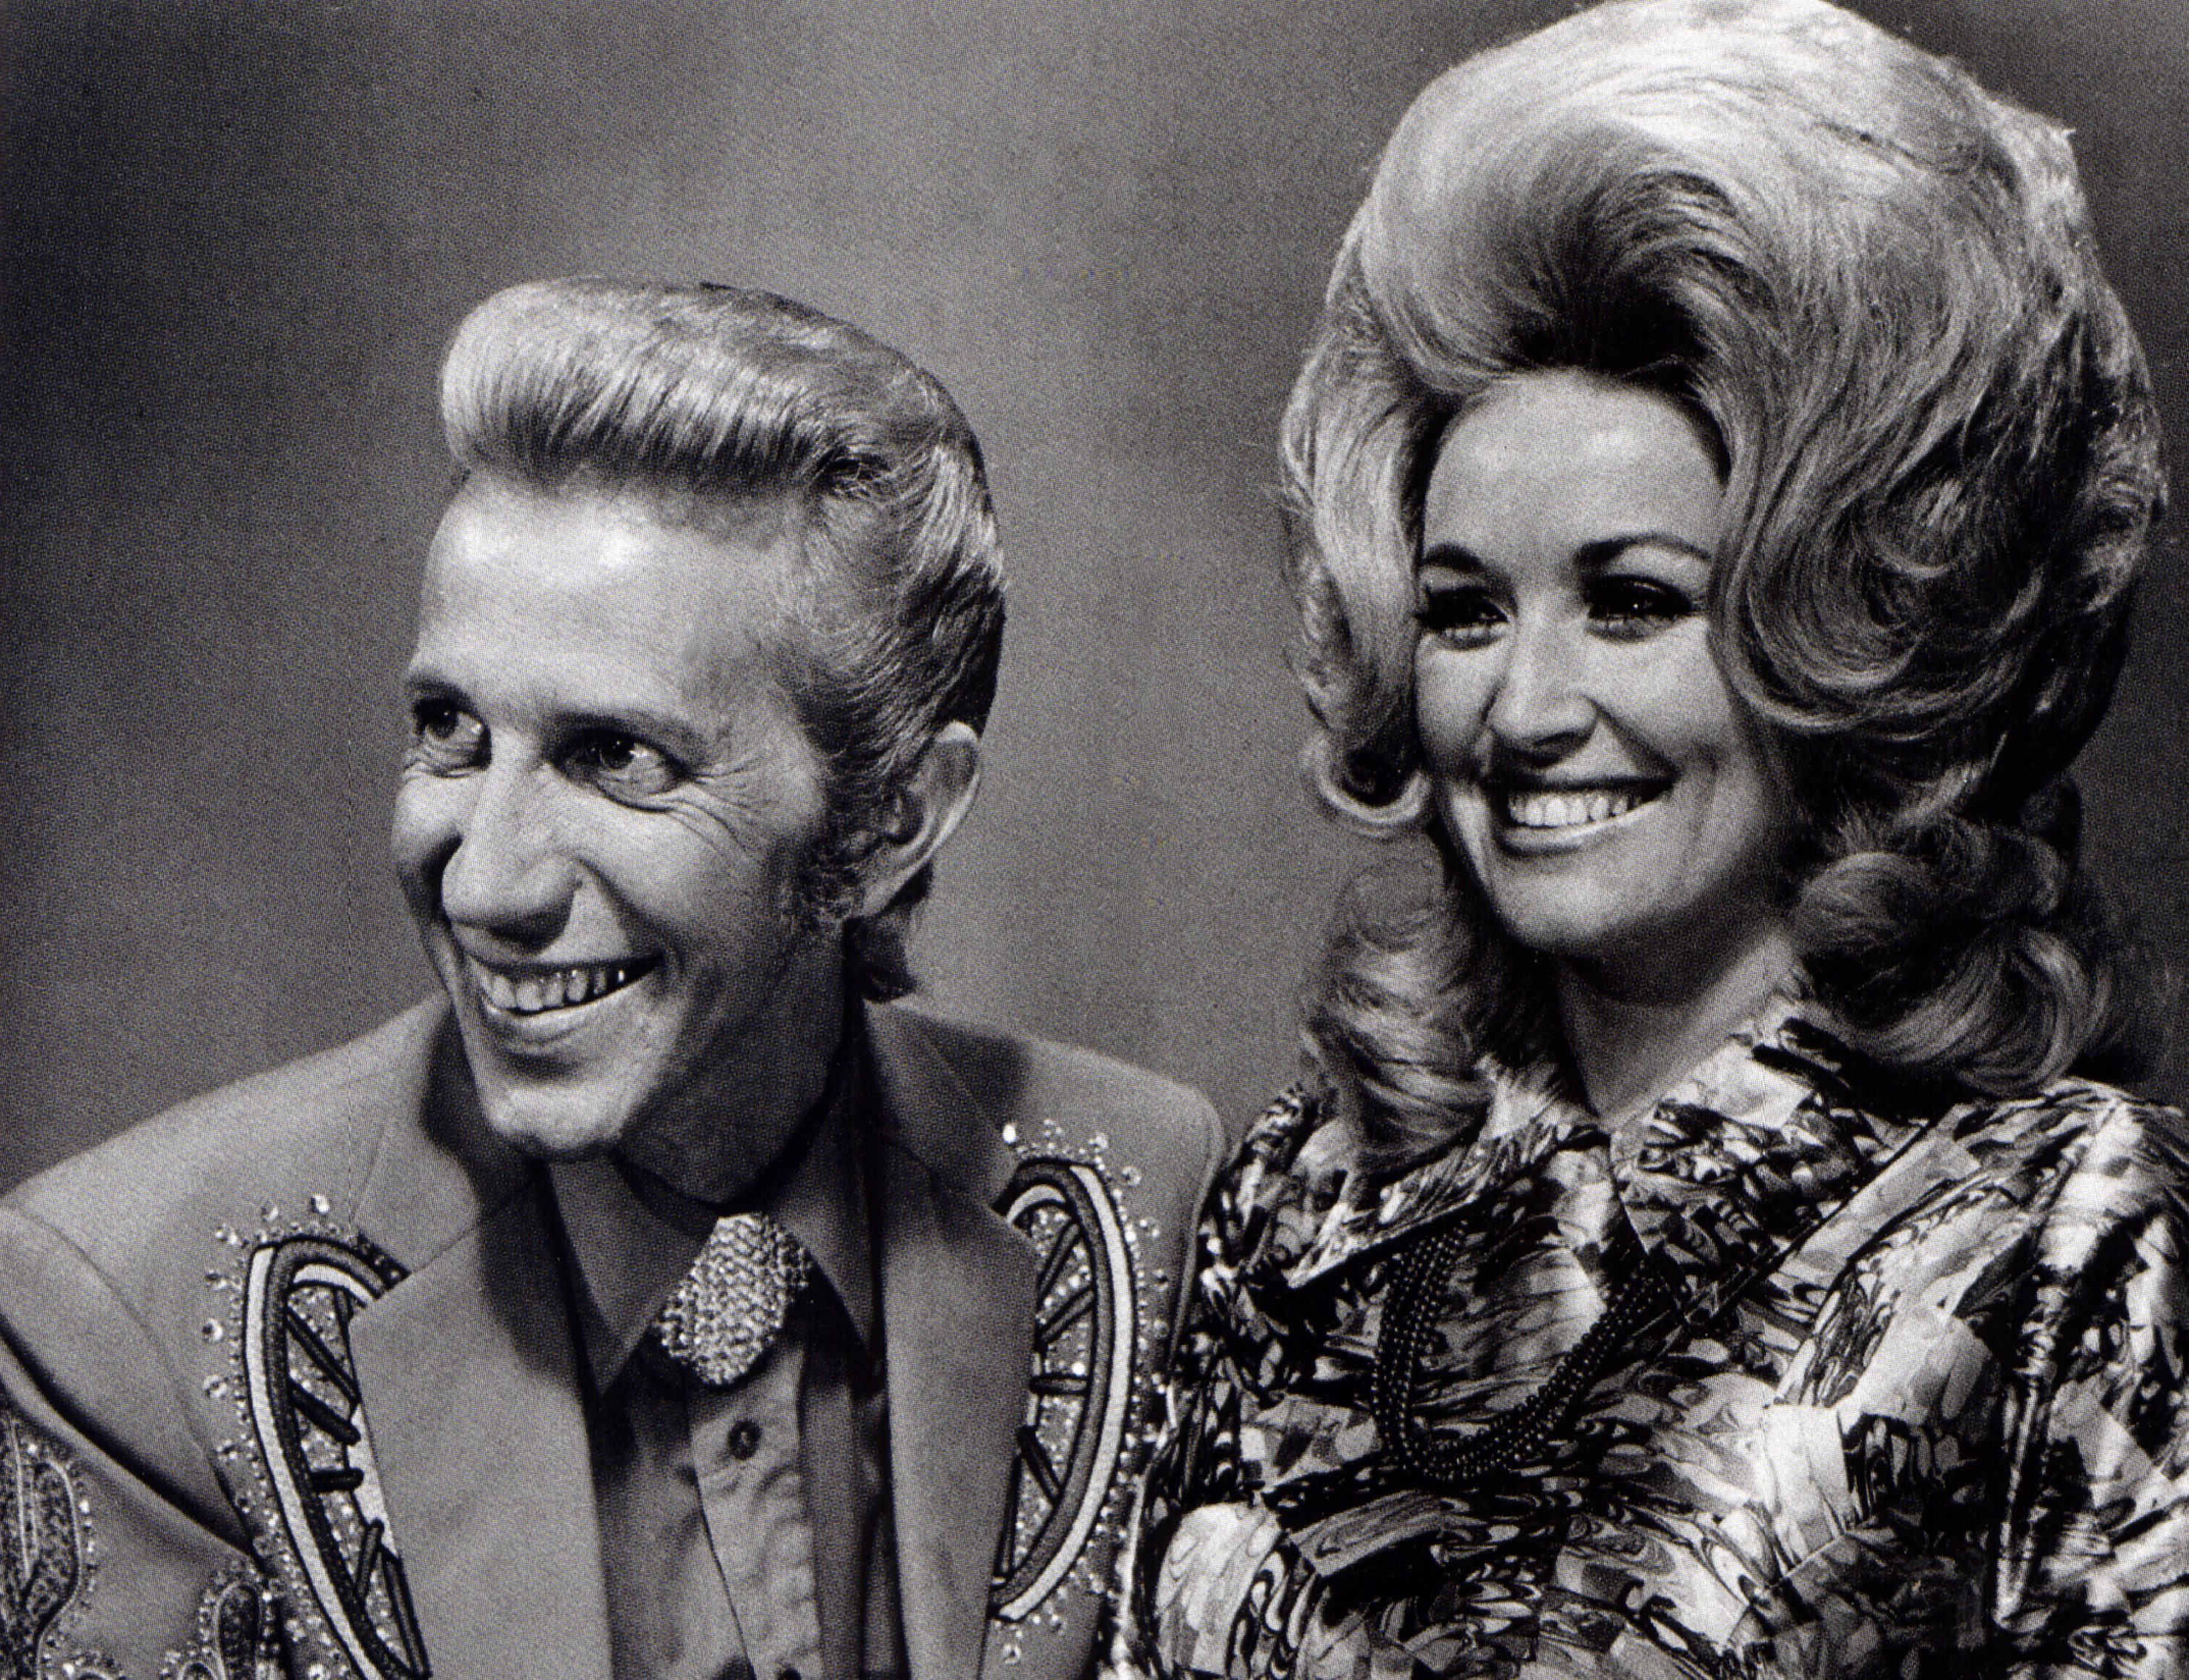 A black and white close-up of Porter Wagoner and Dolly Parton.